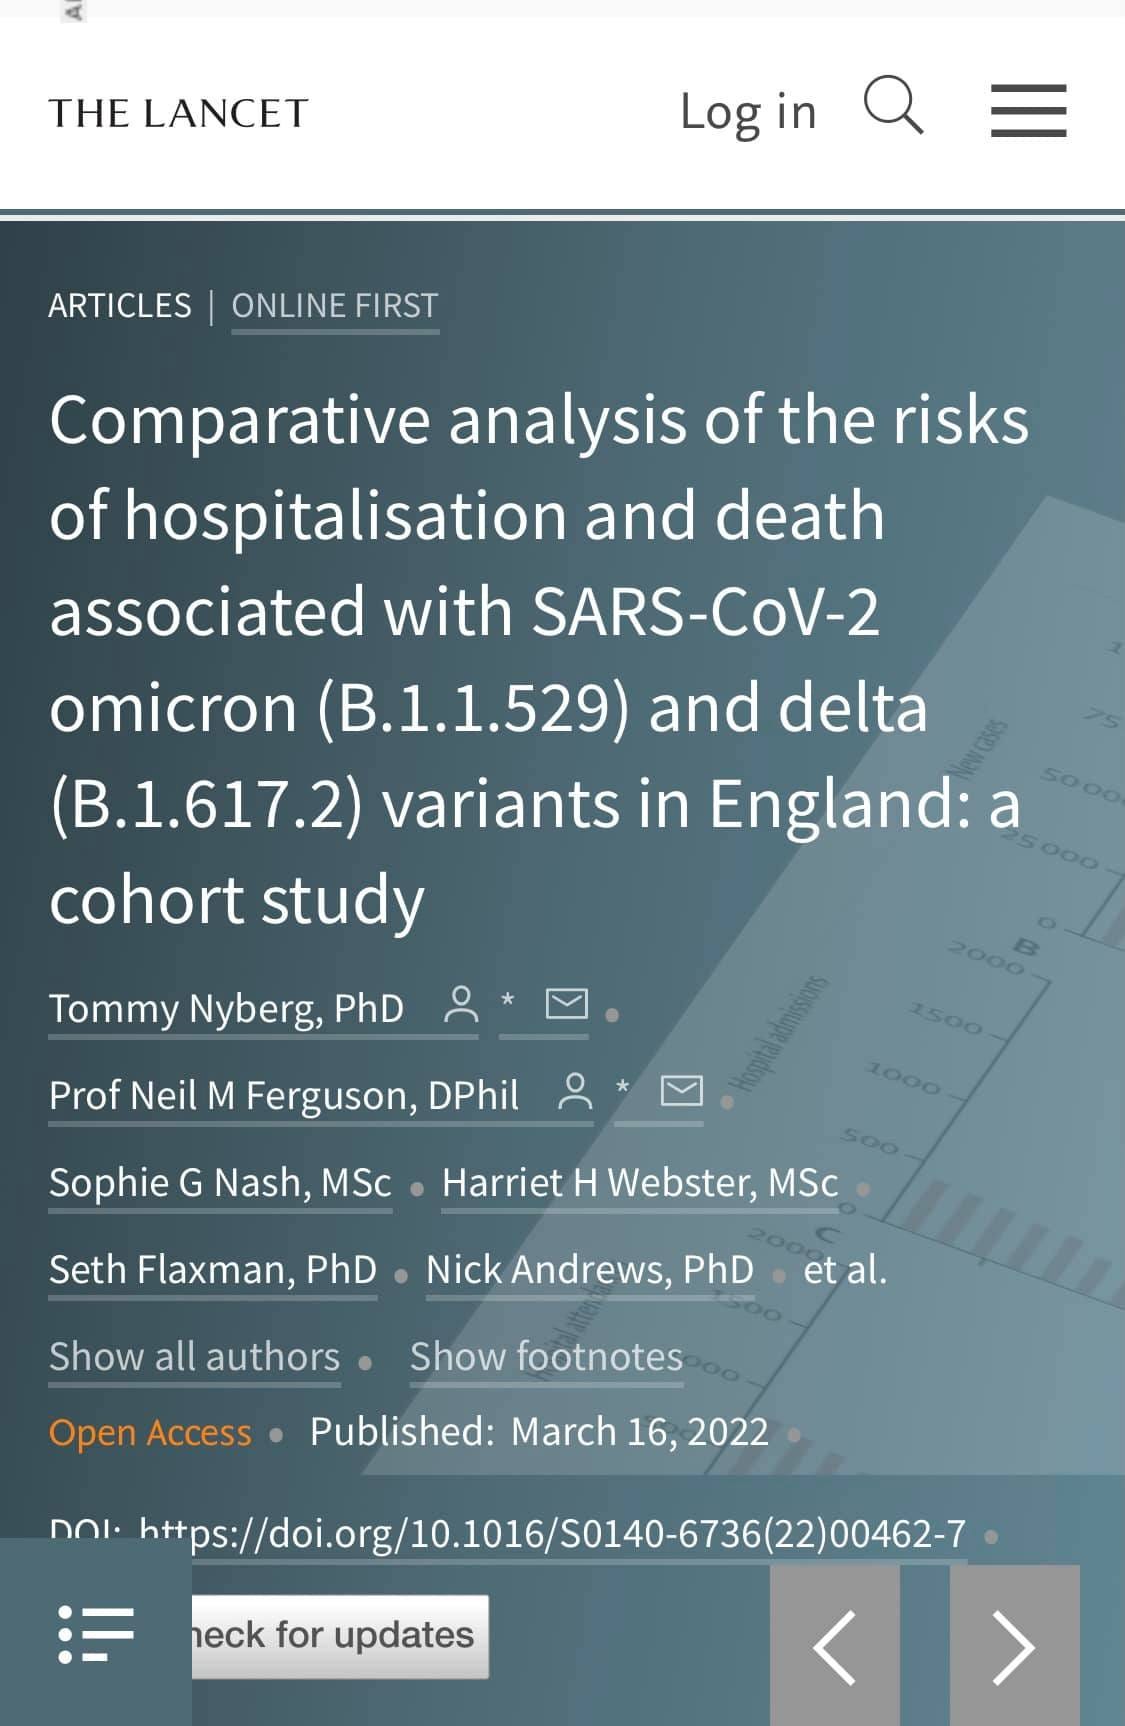 May be an image of ‎text that says '‎THE LANCET Log in ARTICLES ONLINE FIRST Comparative analysis of the risks of hospitalisation and death associated with SARS-CoV-2 omicron (B.1.1.529) and delta (B.1.617.2) variants in England: a cohort study Tommy Nyberg, PhD Prof Neil M Ferguson, DPhil 2000 1500 Sophie G Nash, MSC. Harriet Η Webster, MSC Seth Flaxman, PhD Nick Andrews, PhD Show all authors. et al. Open Access Show footnotes Published: March 16, 2022 חOI 0/04-3204627 eck for updates‎'‎